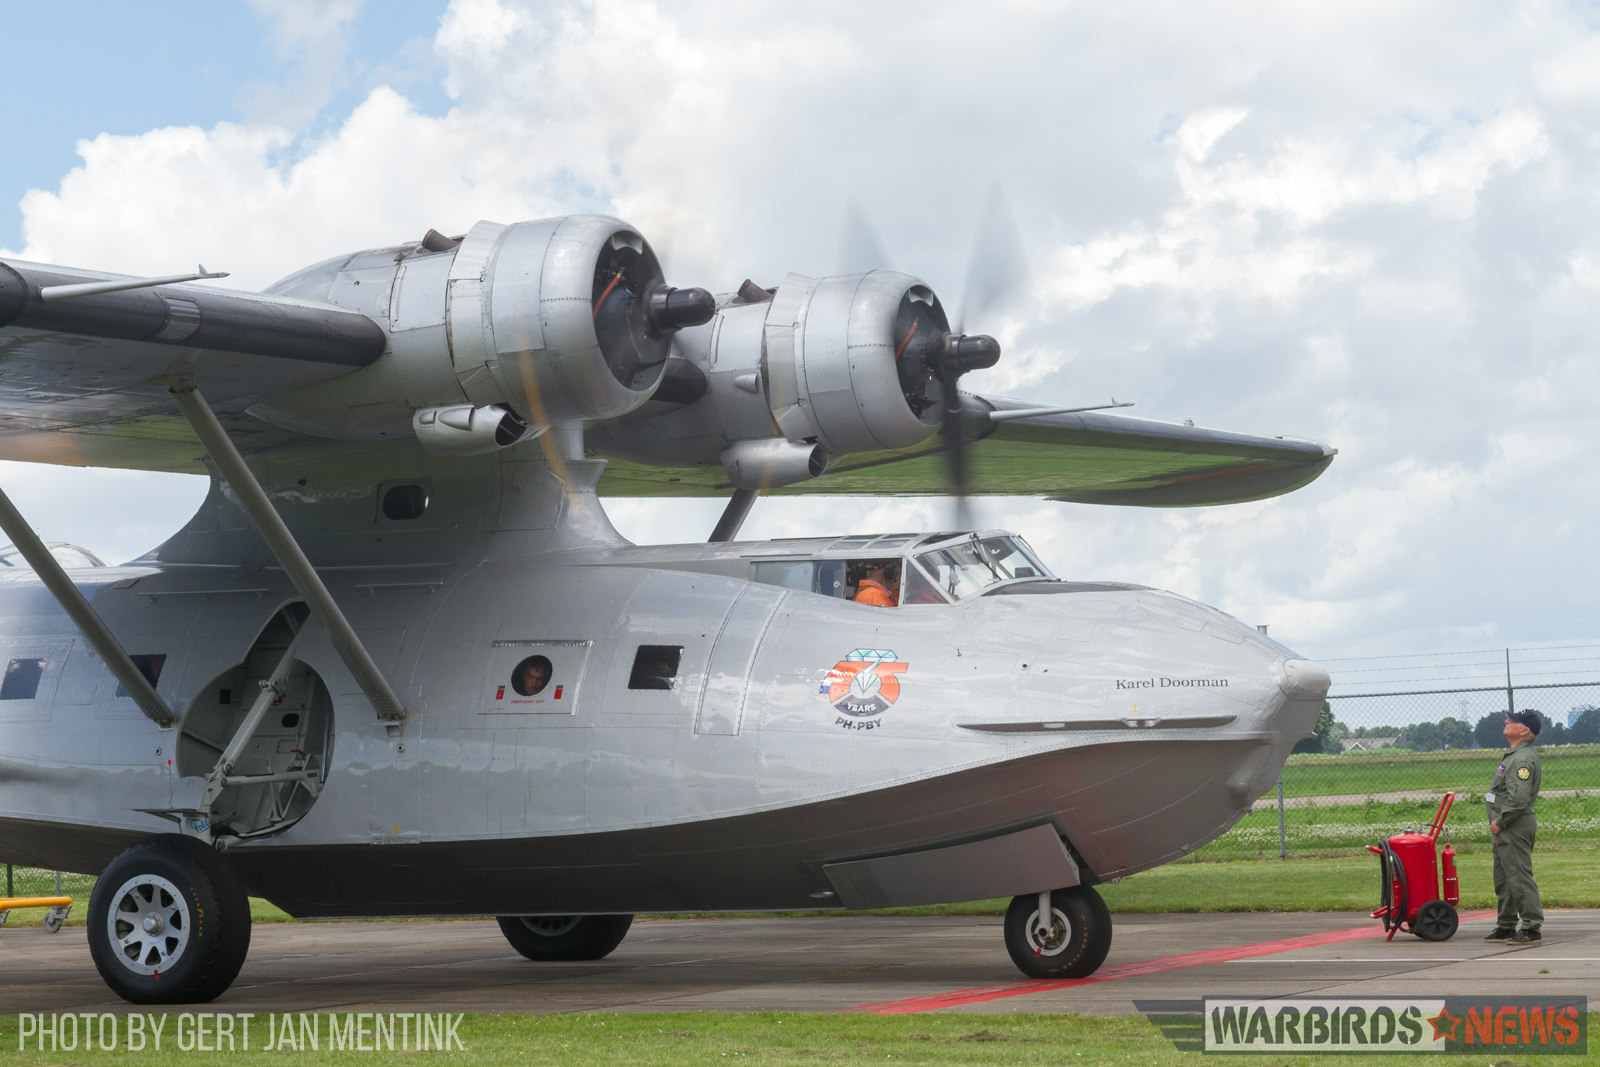 PH-PBY's Pratt & Whitney R-1830's have just been fired up and need some warming before take-off. One of the Catalina Association volunteer keeps an eye on their condition. The inevitable fire extinguisher within reach! (Gert Jan Mentink)